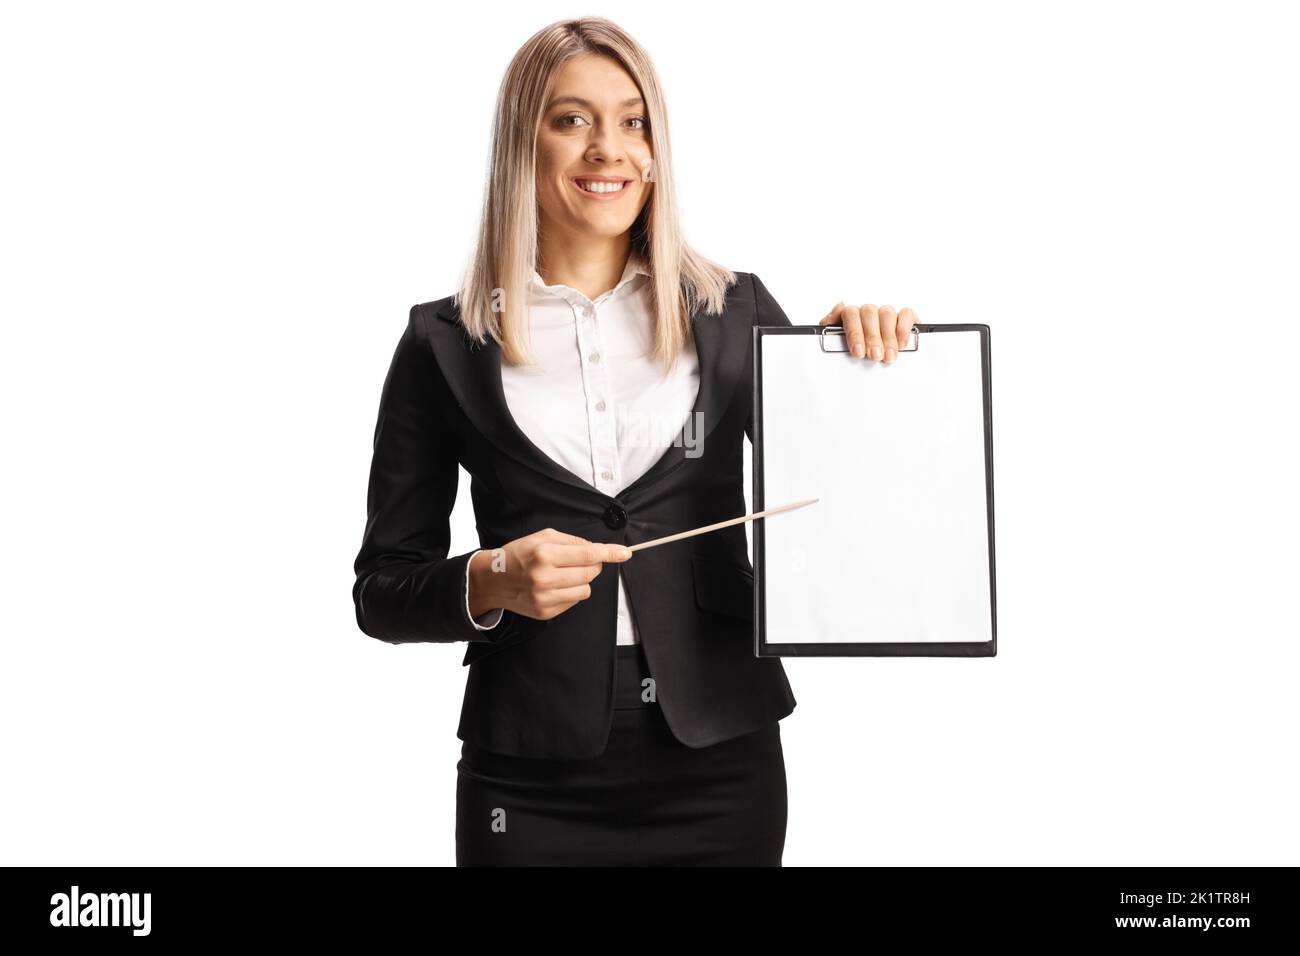 Businesswoman smiling and presenting with a clipboard isolated on white background Stock Photo